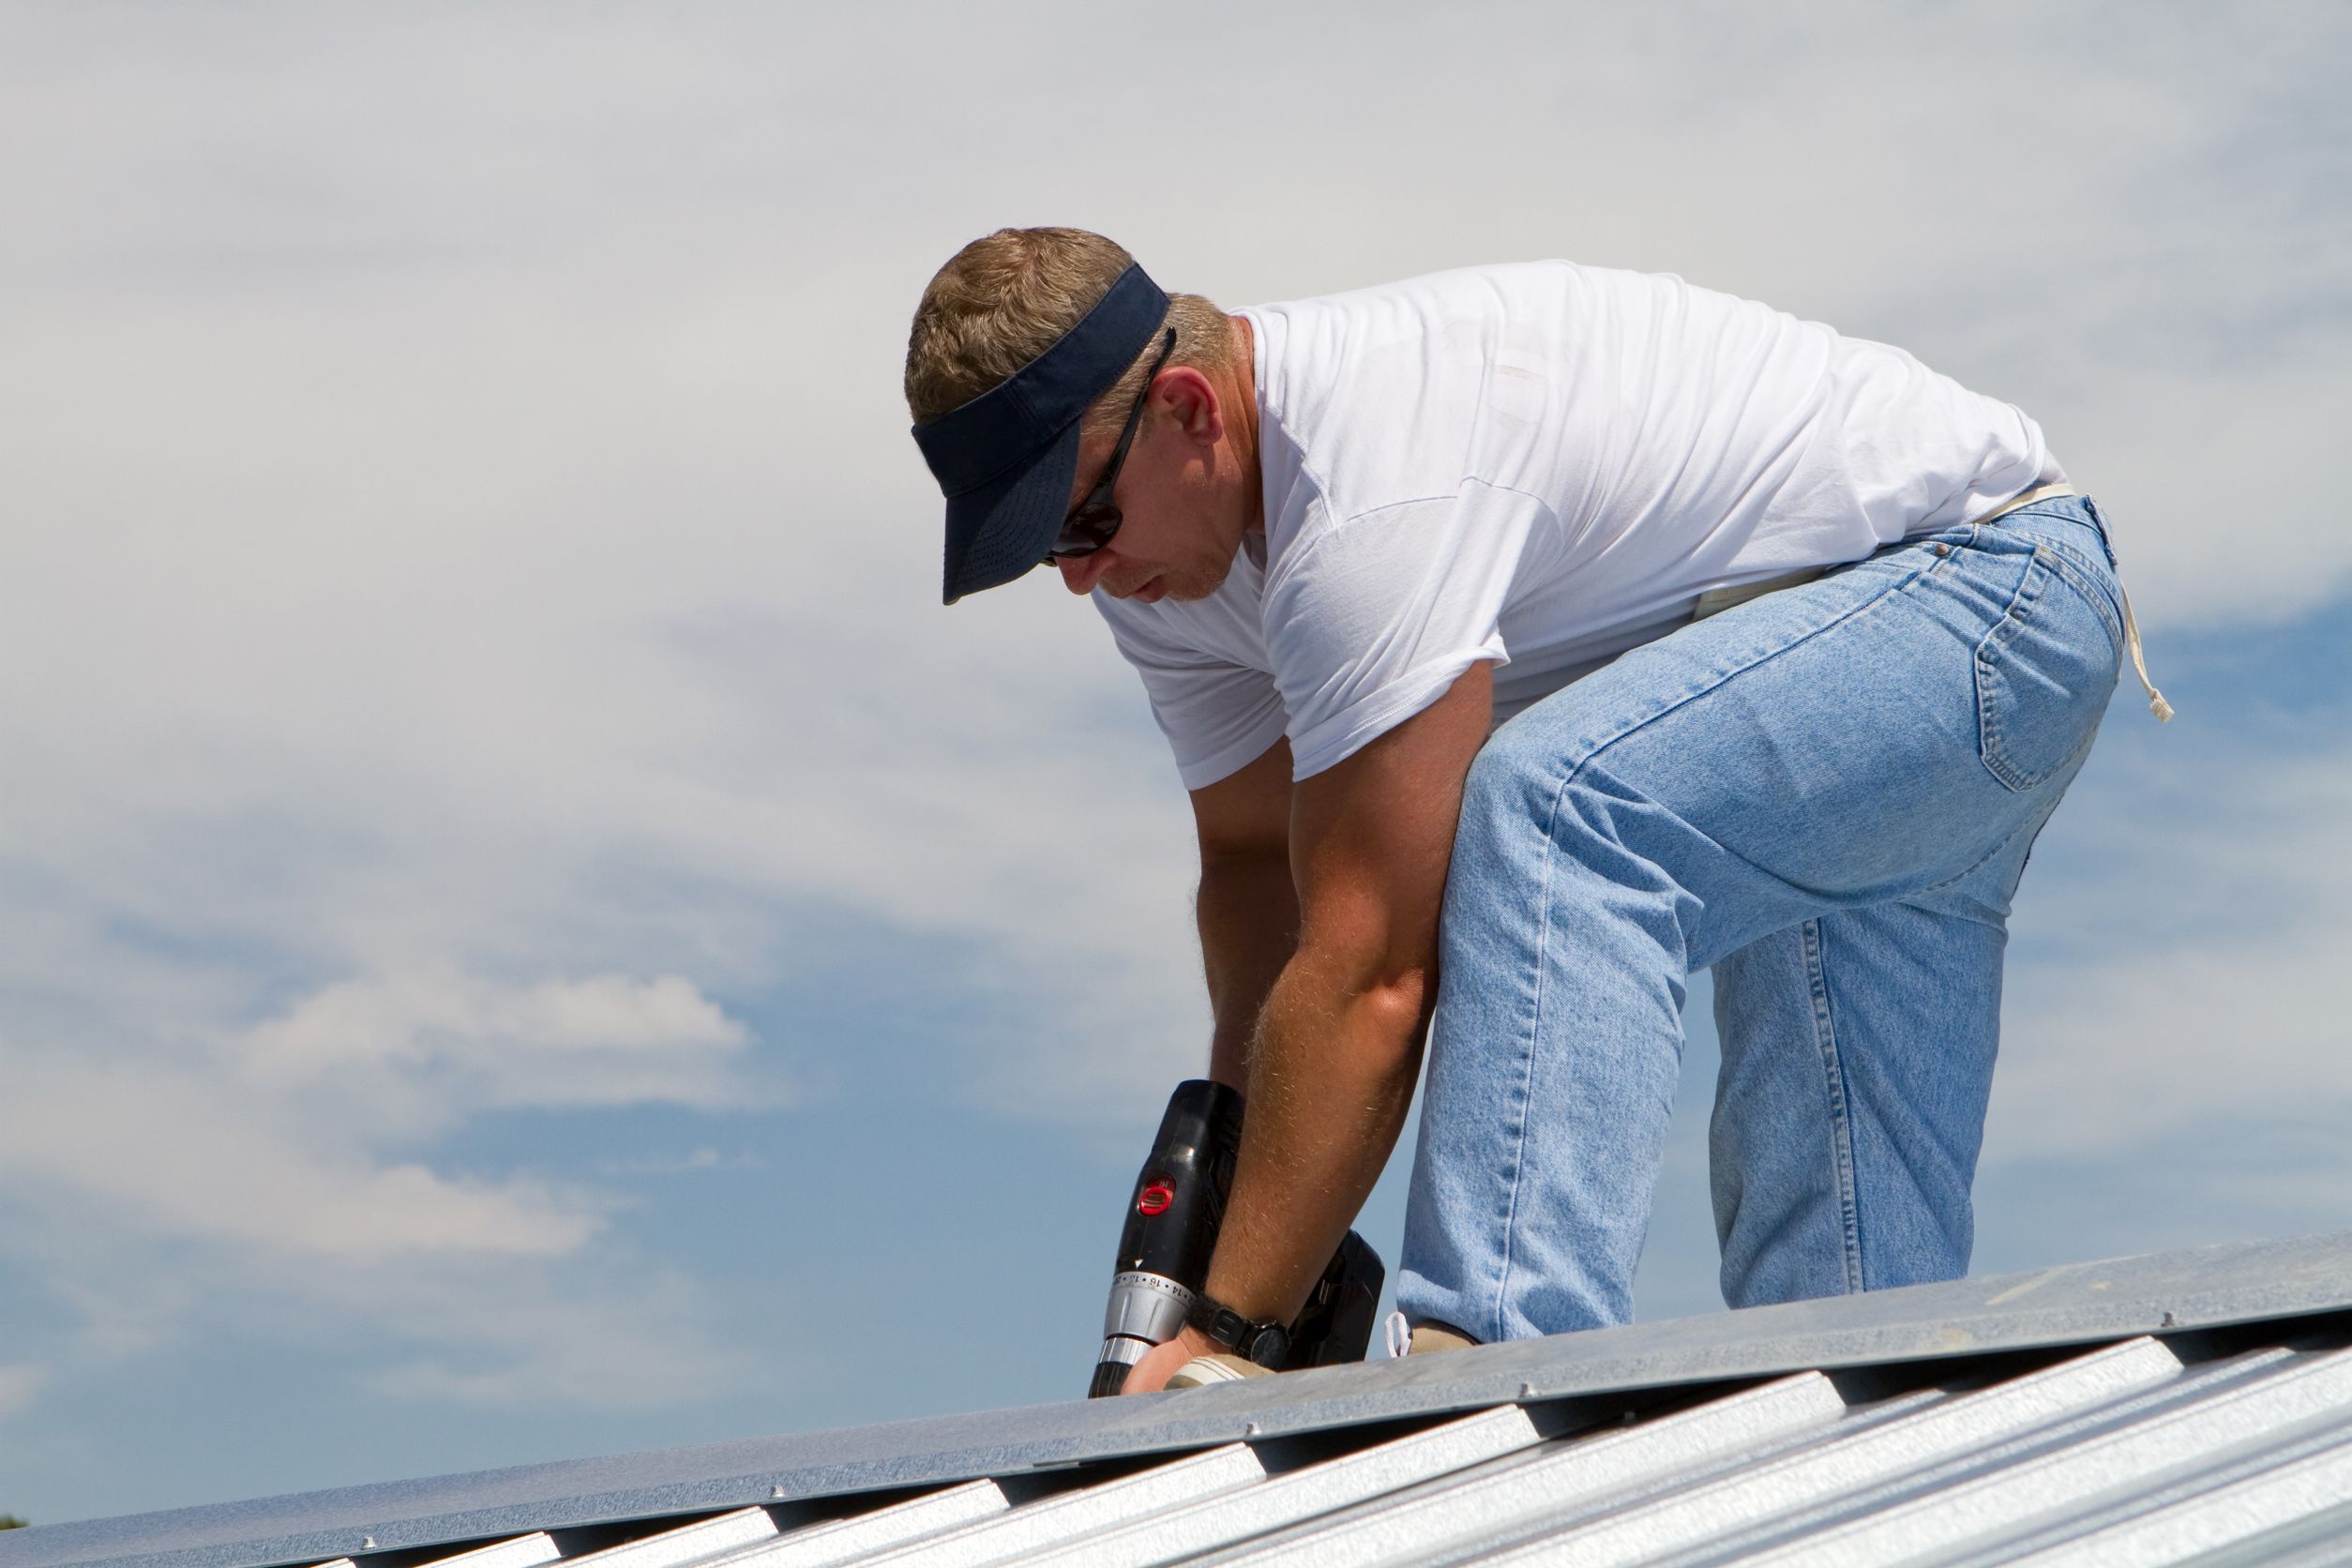 A Professional Roofing Company in San Antonio, TX Handles All Types of Roofing Jobs